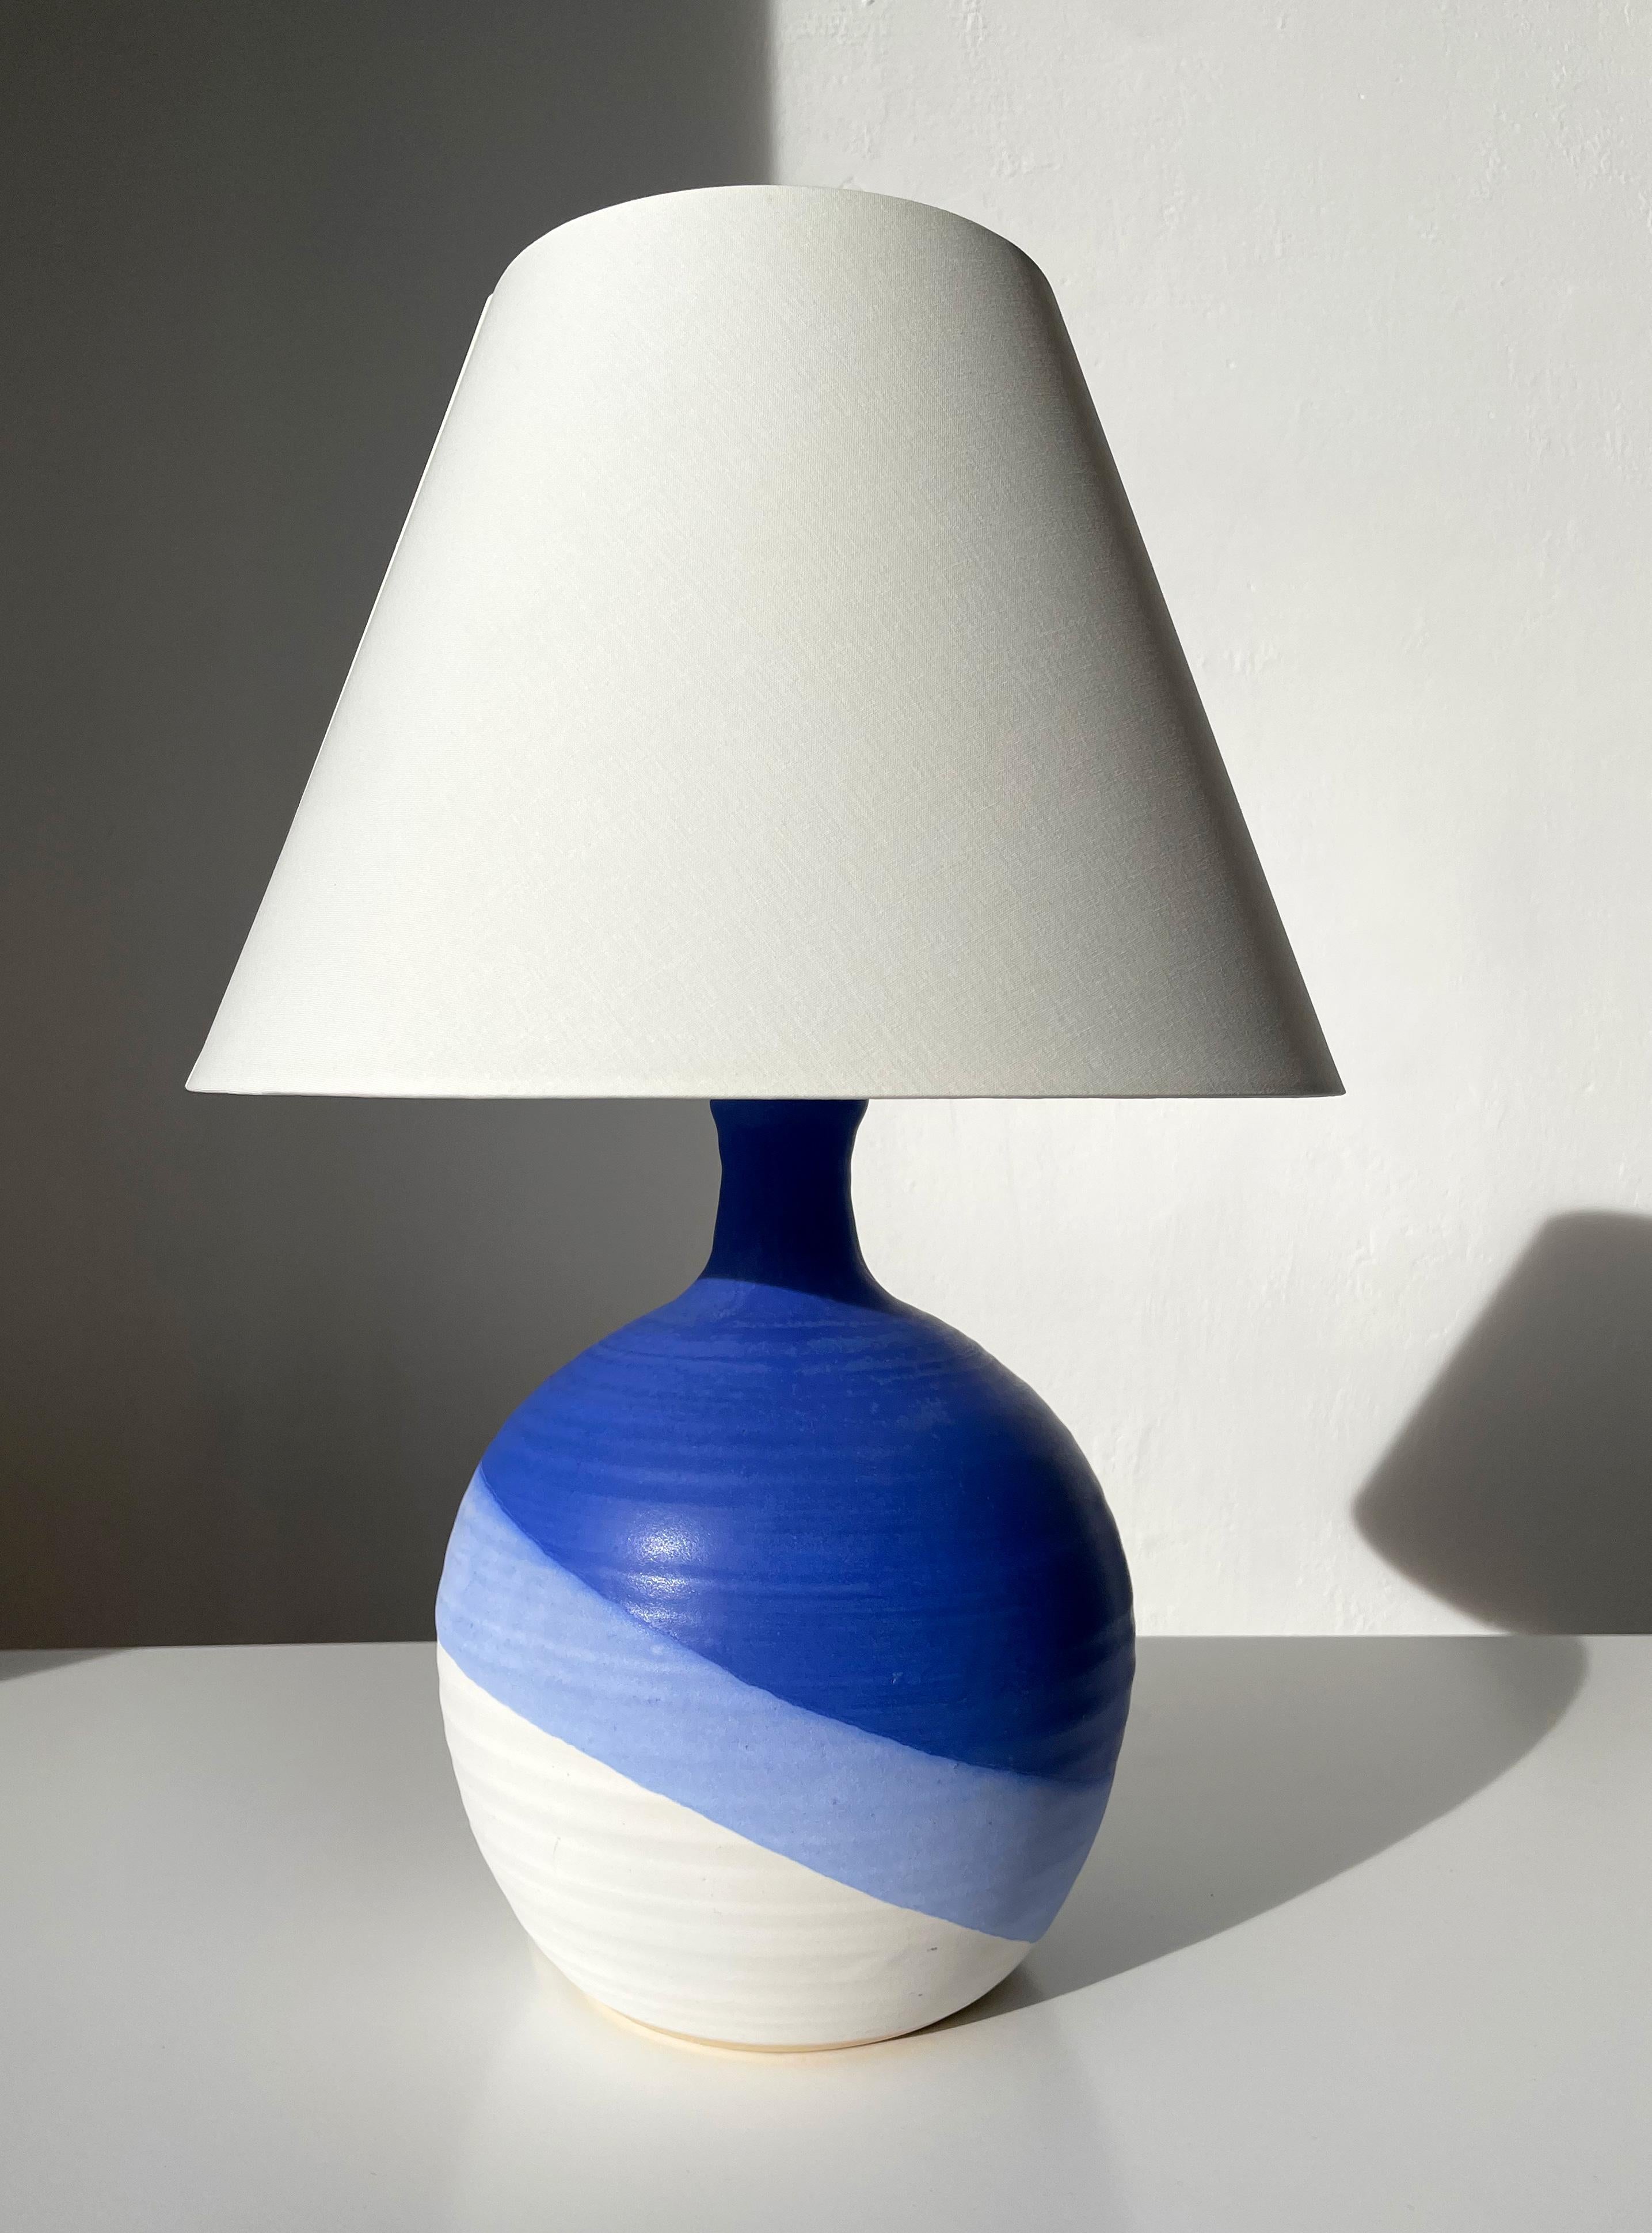 Danish modernist ceramic globe shaped table lamp. Shiny blue glaze over matte lilac and white glaze in asymmetrical stripes accentuating the round shape. Manufactured by KN Keramik in the 1980s. Signed under base. New fitting for E27 bulb. Switch on